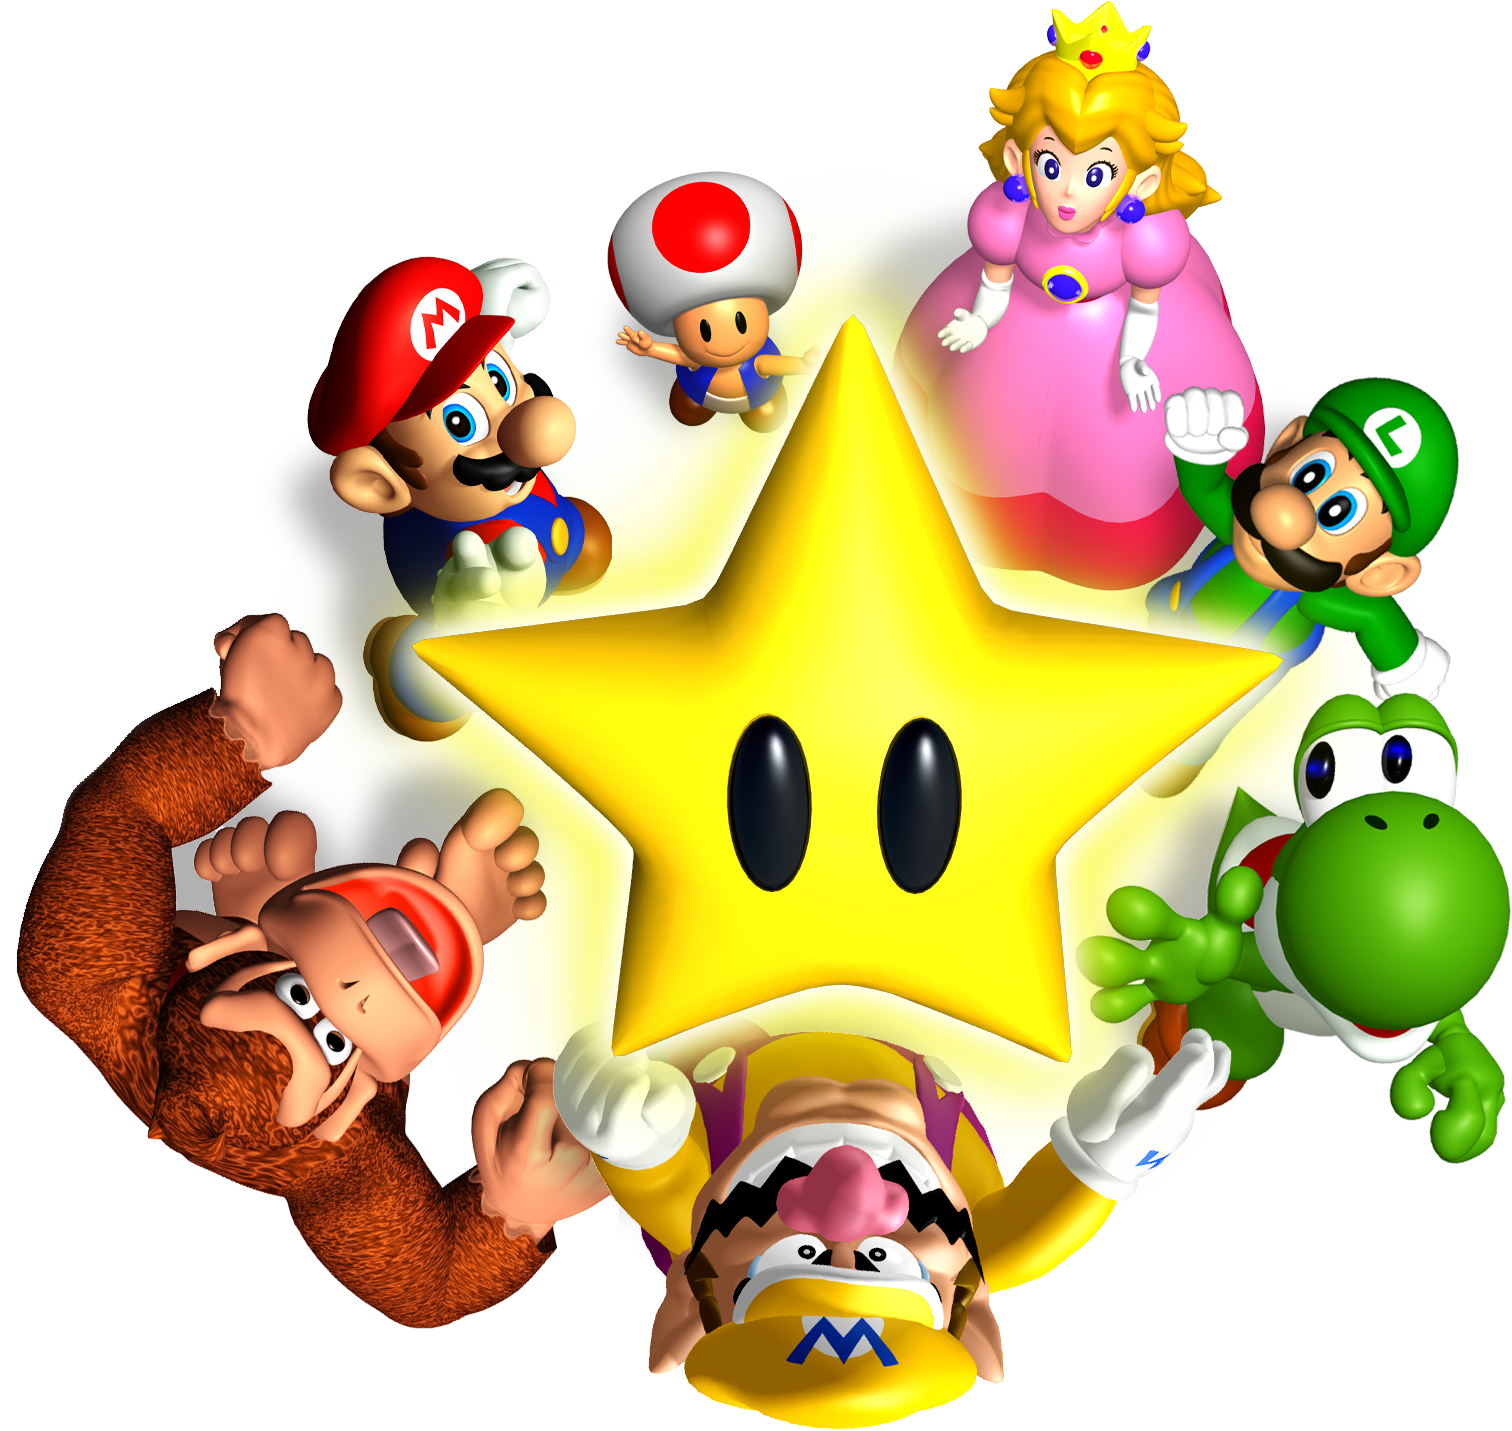 Star_Group_Artwork_-_Mario_Party.png